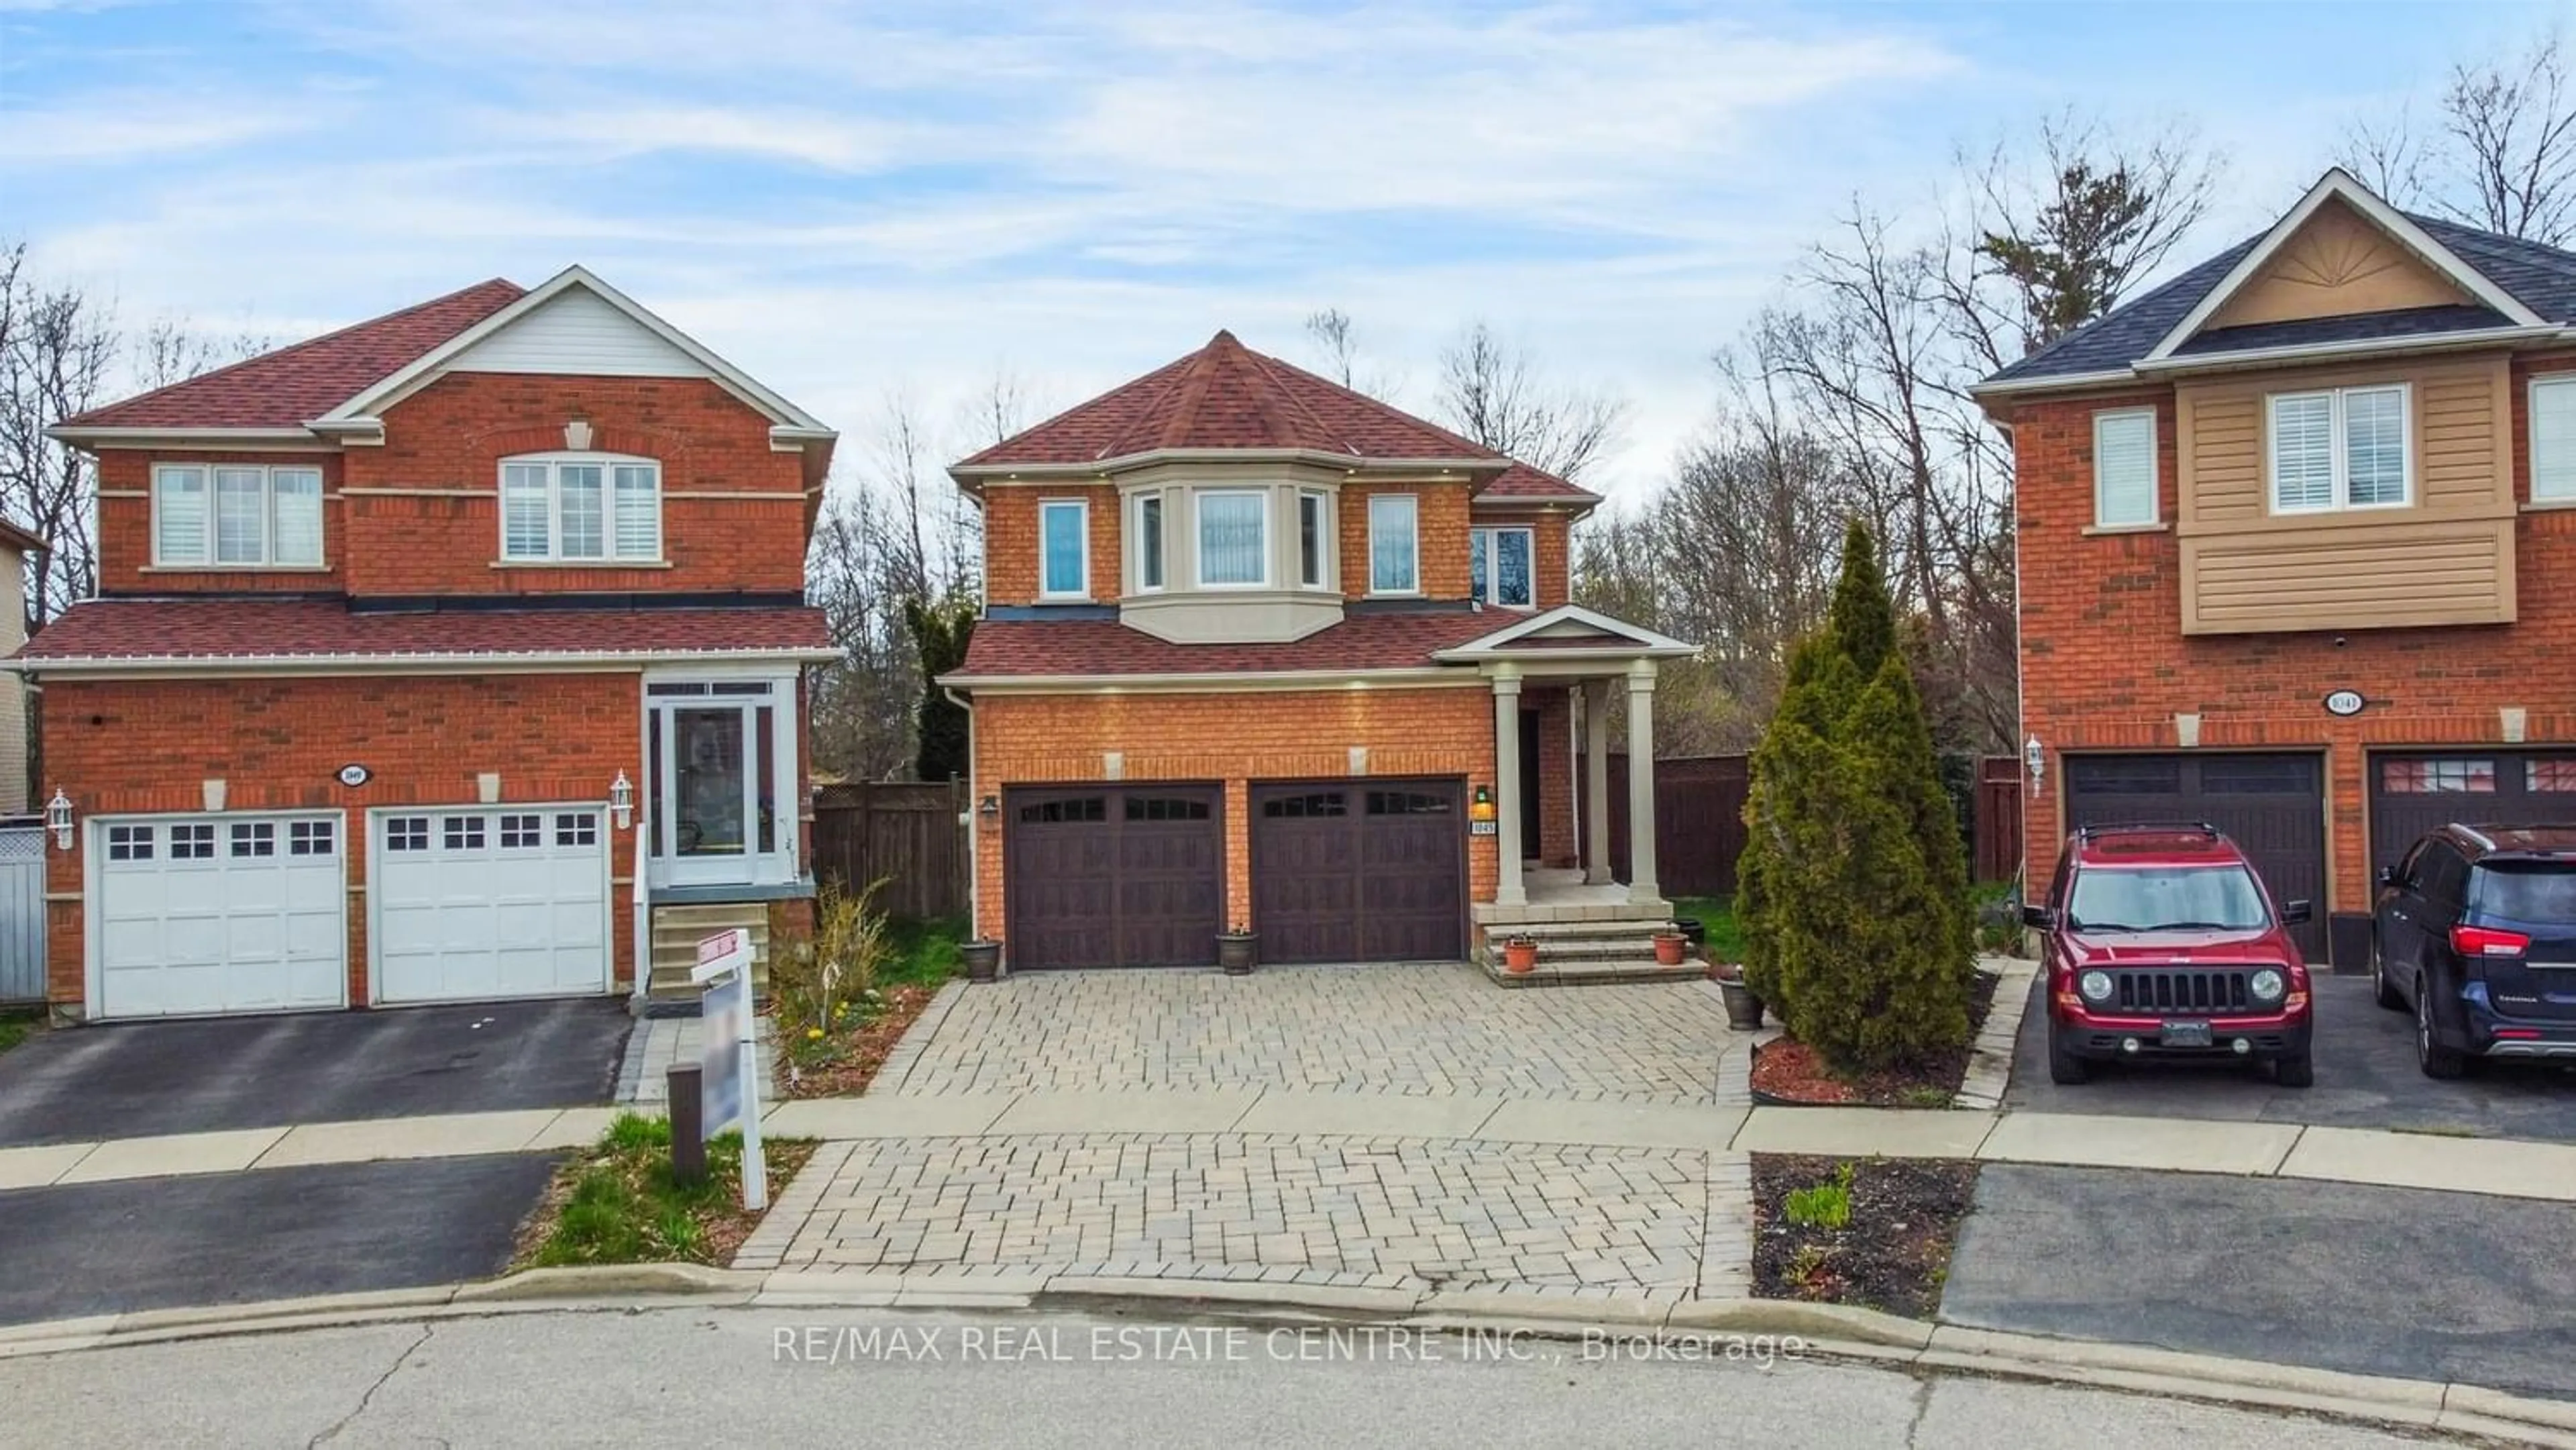 Home with brick exterior material for 1045 Knotty Pine Grve, Mississauga Ontario L5W 1J7